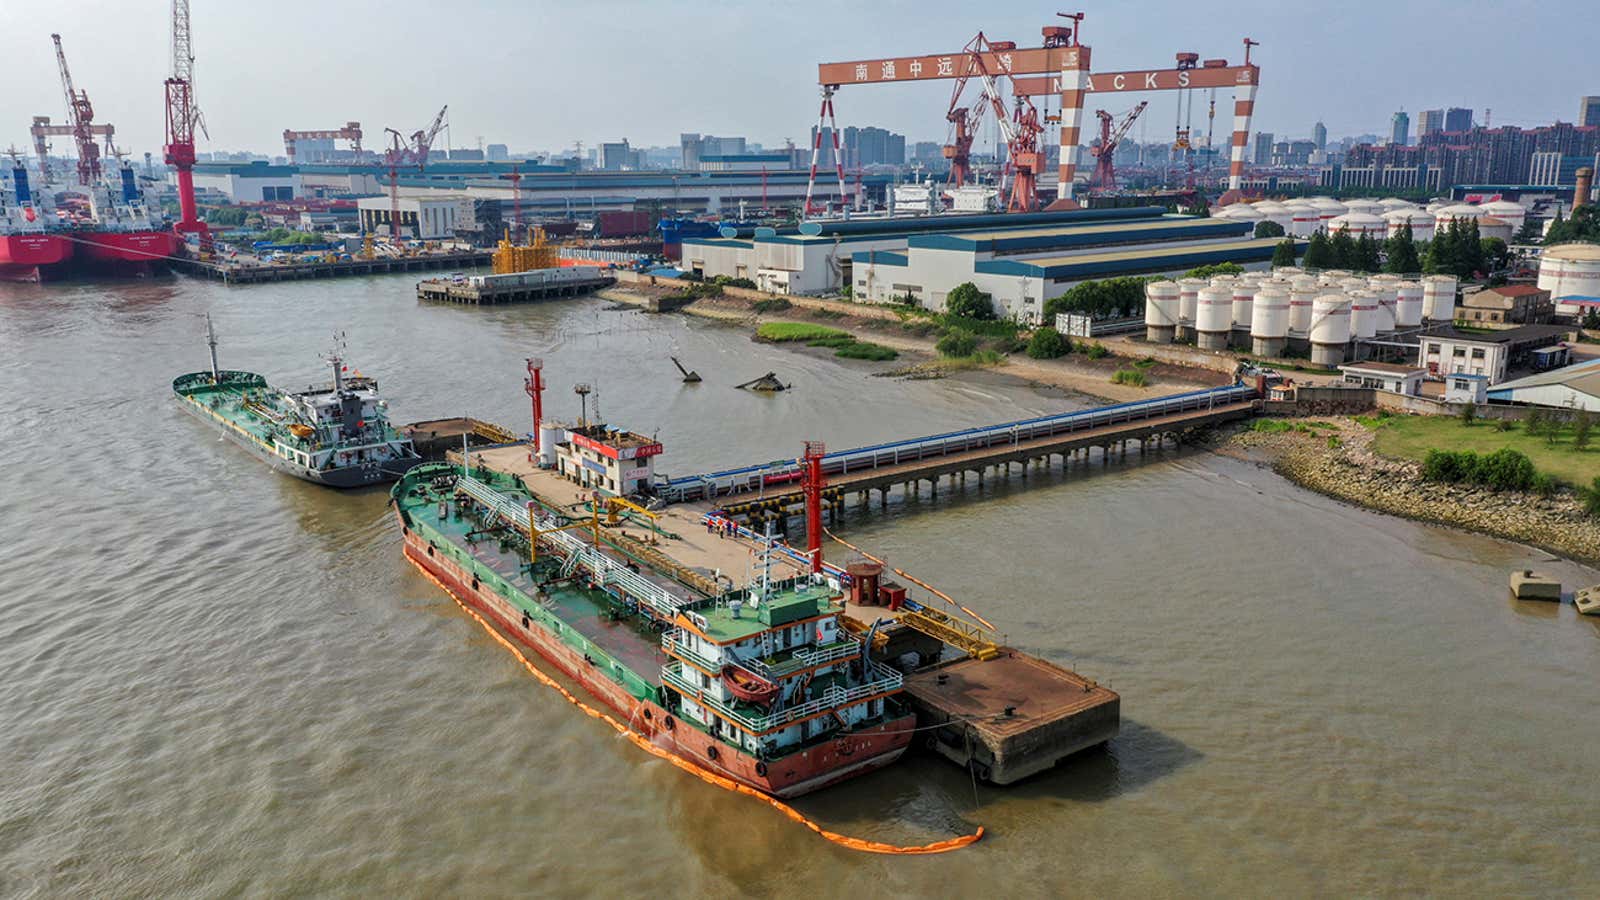 FILE PHOTO: Oil tankers are seen at a terminal of Sinopec Yaogang oil depot in Nantong, Jiangsu province, China June 11, 2019. Picture taken June 11, 2019. REUTERS/Stringer  ATTENTION EDITORS – THIS IMAGE WAS PROVIDED BY A THIRD PARTY. CHINA OUT./File Photo